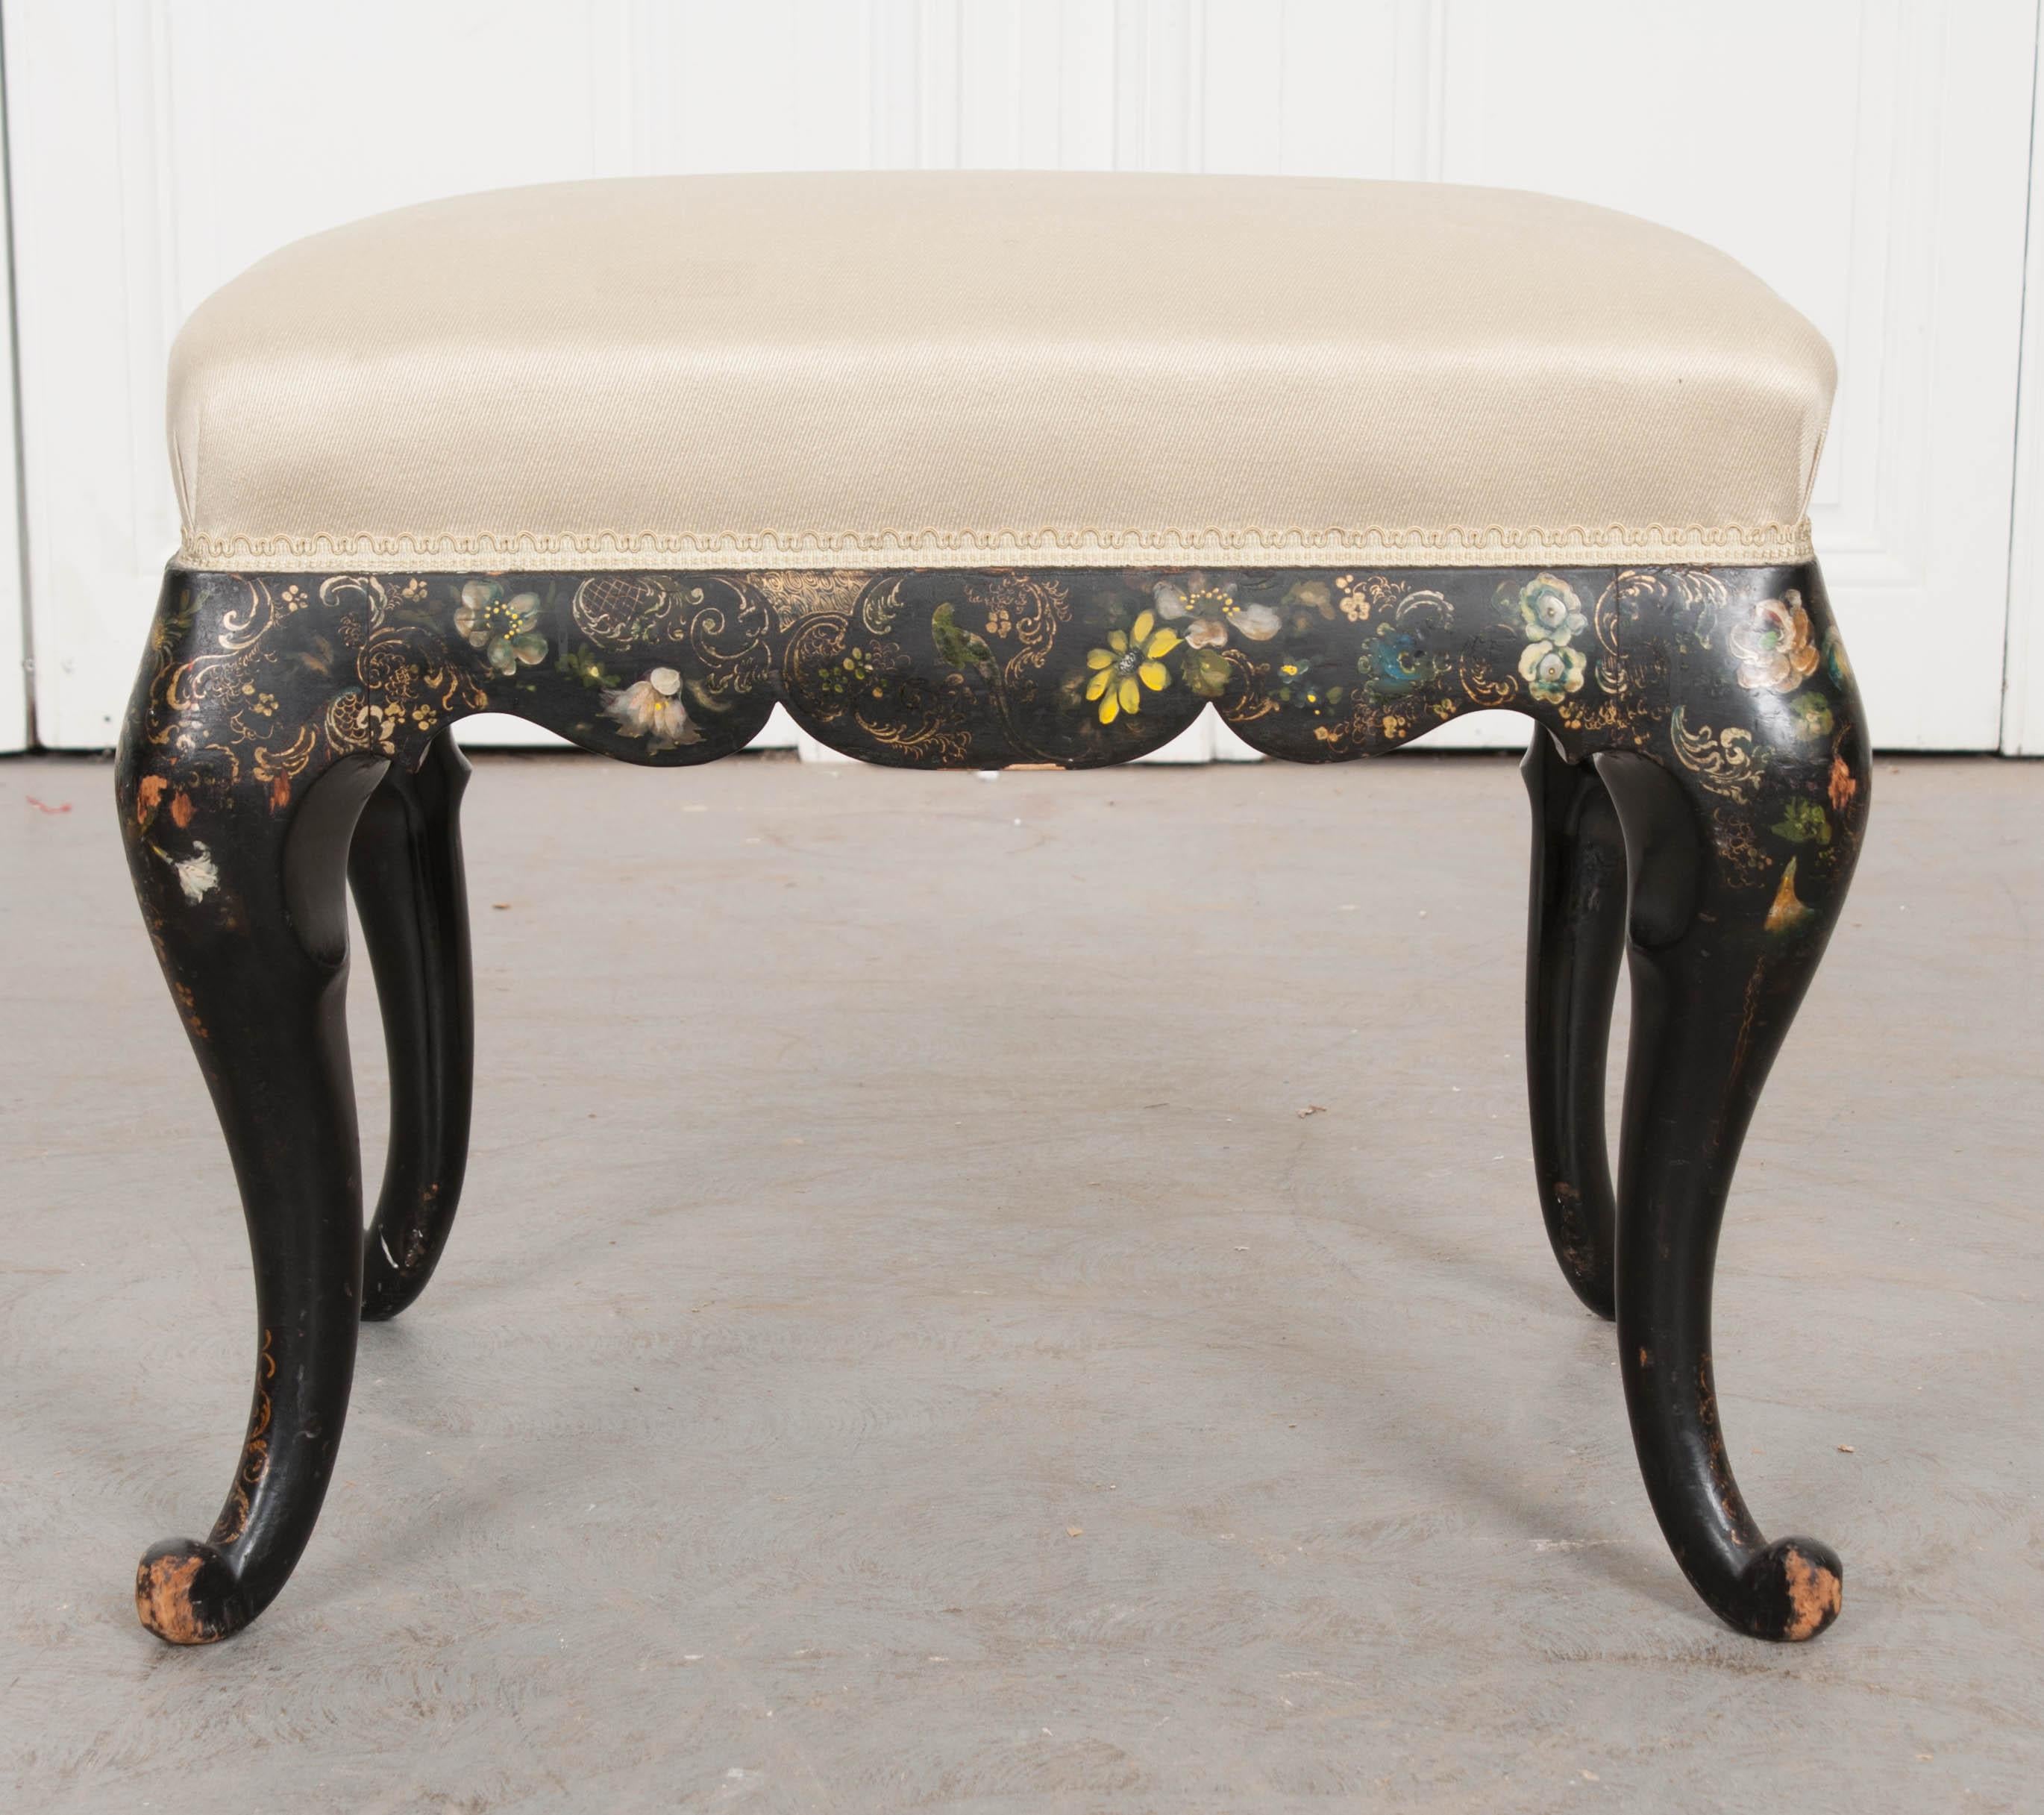 A beautiful hand painted stool from 1900s, England. The antique is upholstered in a creamy gold silk fabric that is affixed to the frame using the same creamy gold-colored gimp tape. The frame is ebonized, with the four legs having a cabriole form